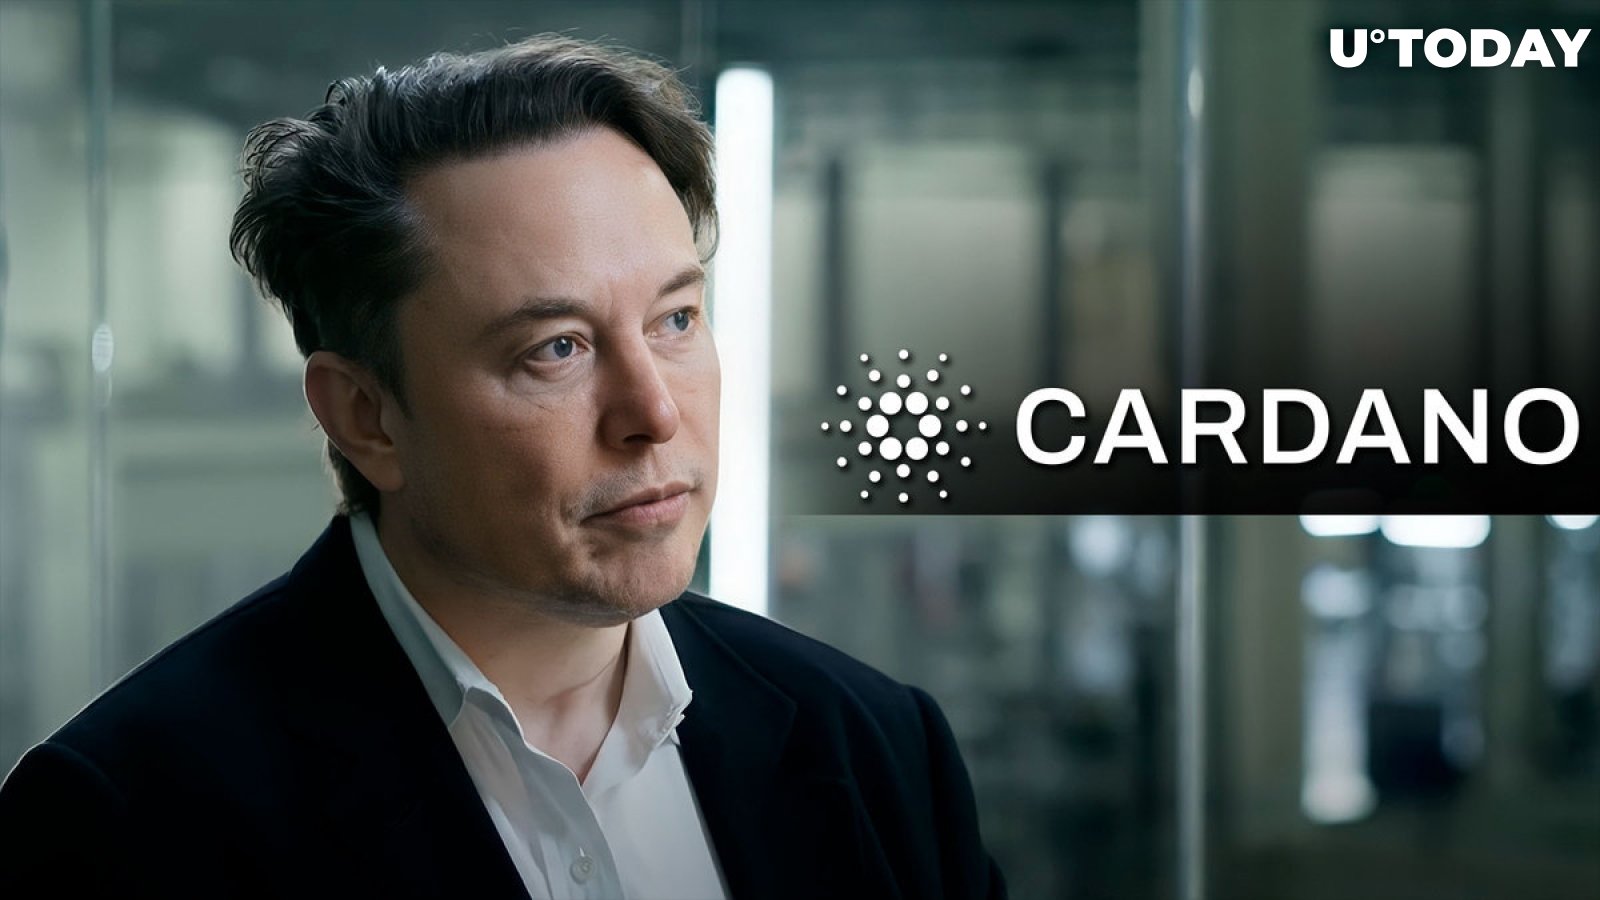 Elon Musk Makes Surprising Cardano (ADA) Move, But There's Big Catch